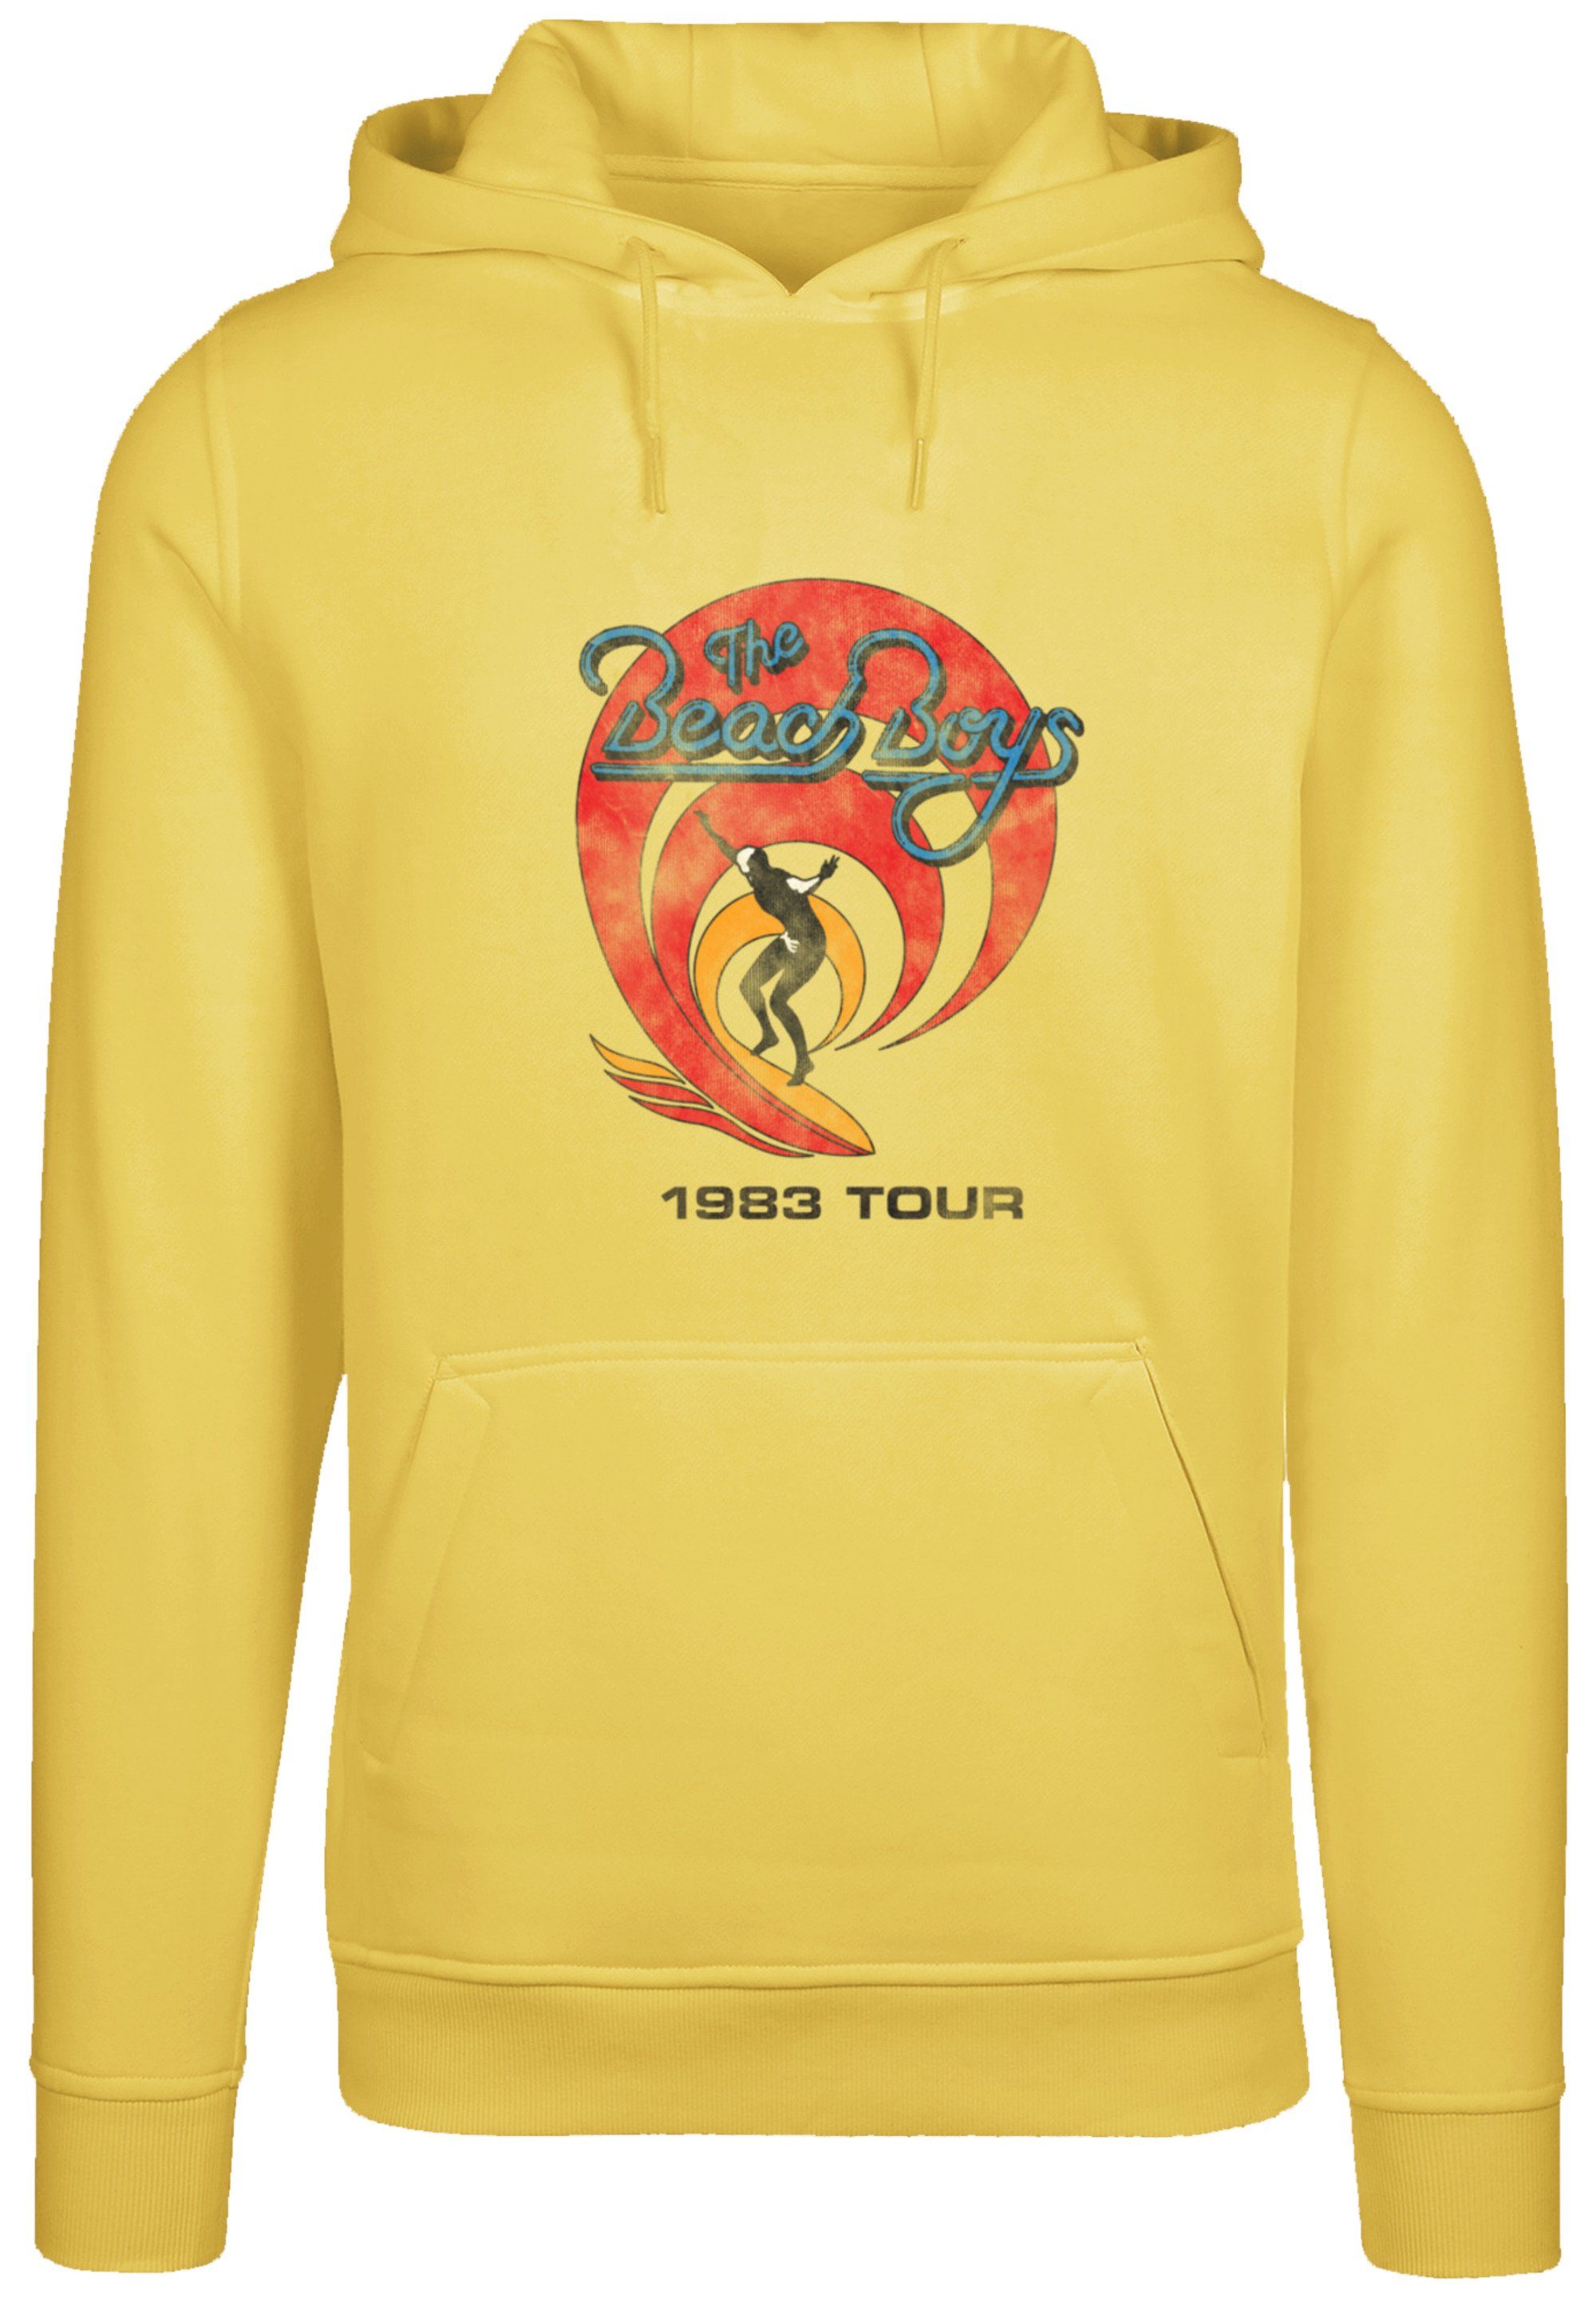 F4NT4STIC Kapuzenpullover The Beach Boys Surfer Rock Musik Band Vintage Hoodie, Warm, Bequem taxi yellow